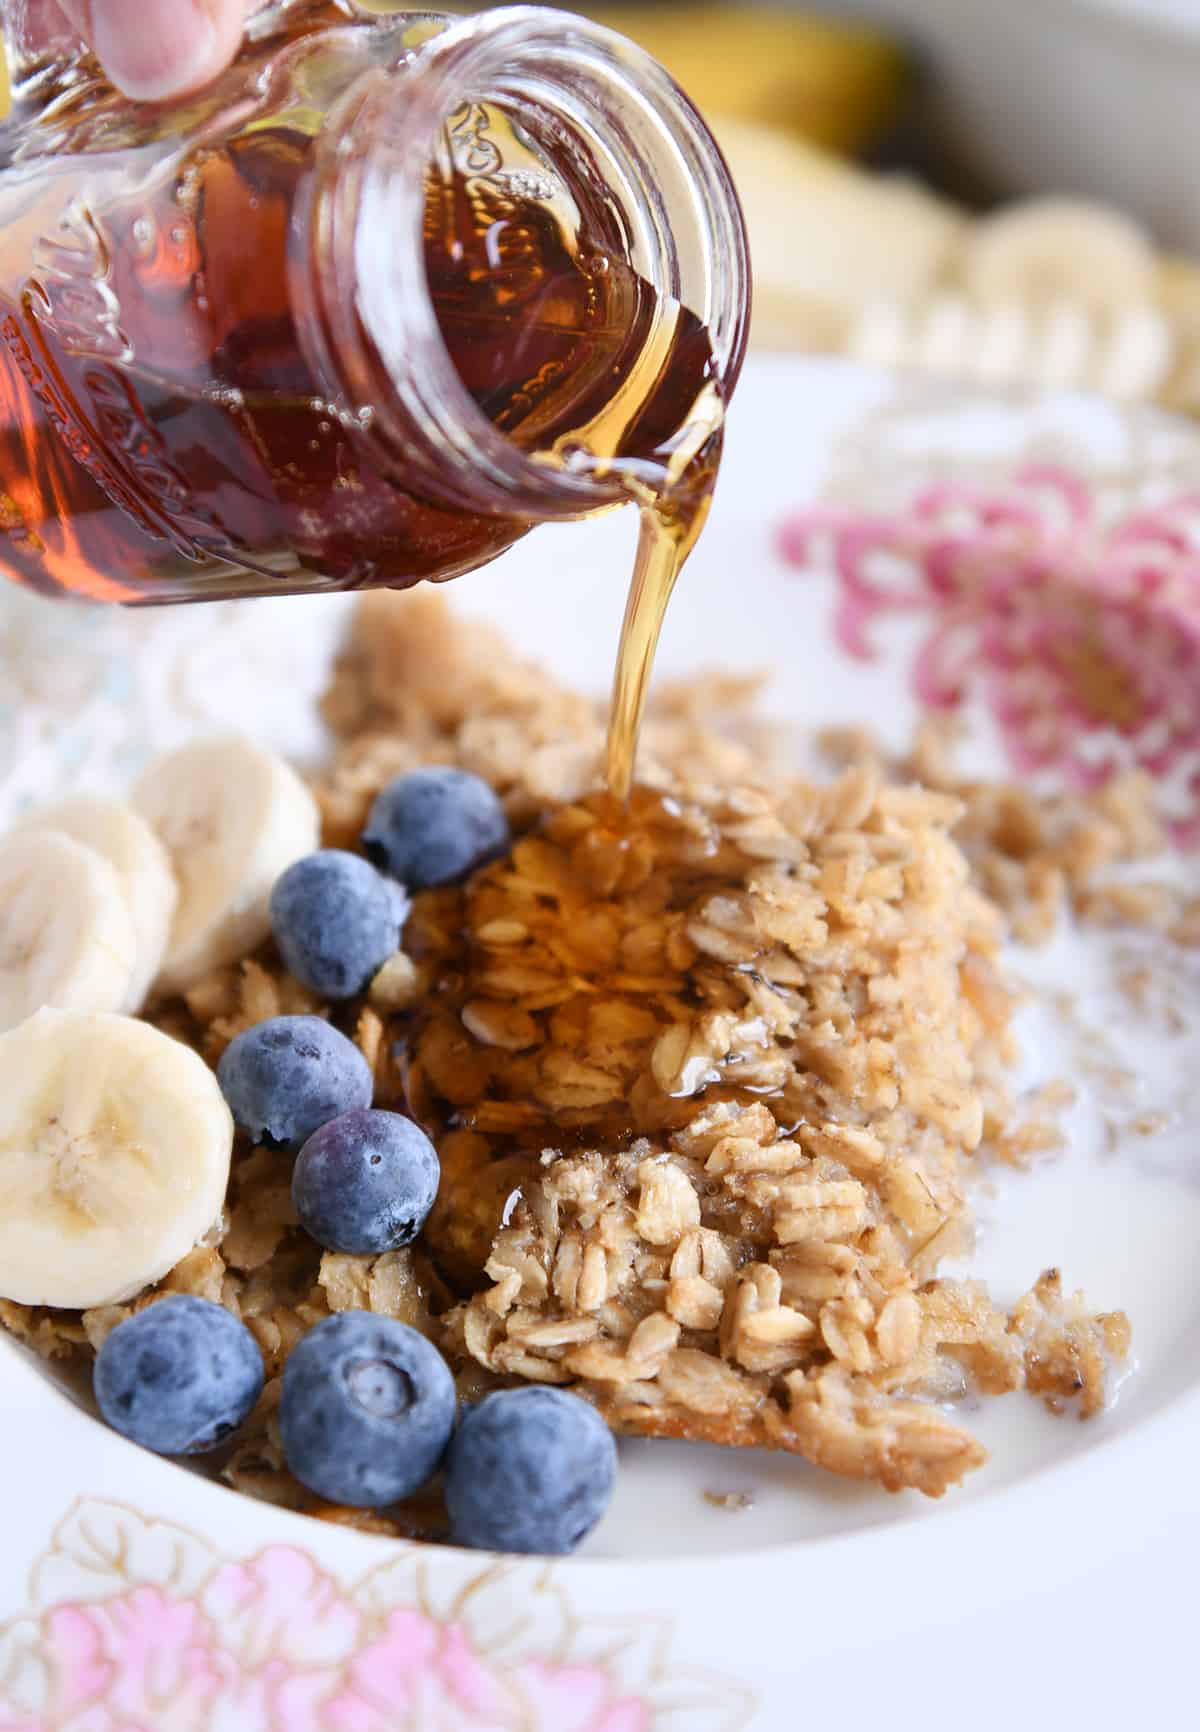 pouring maple syrup over bowl of amish baked oatmeal with blueberries and sliced bananas